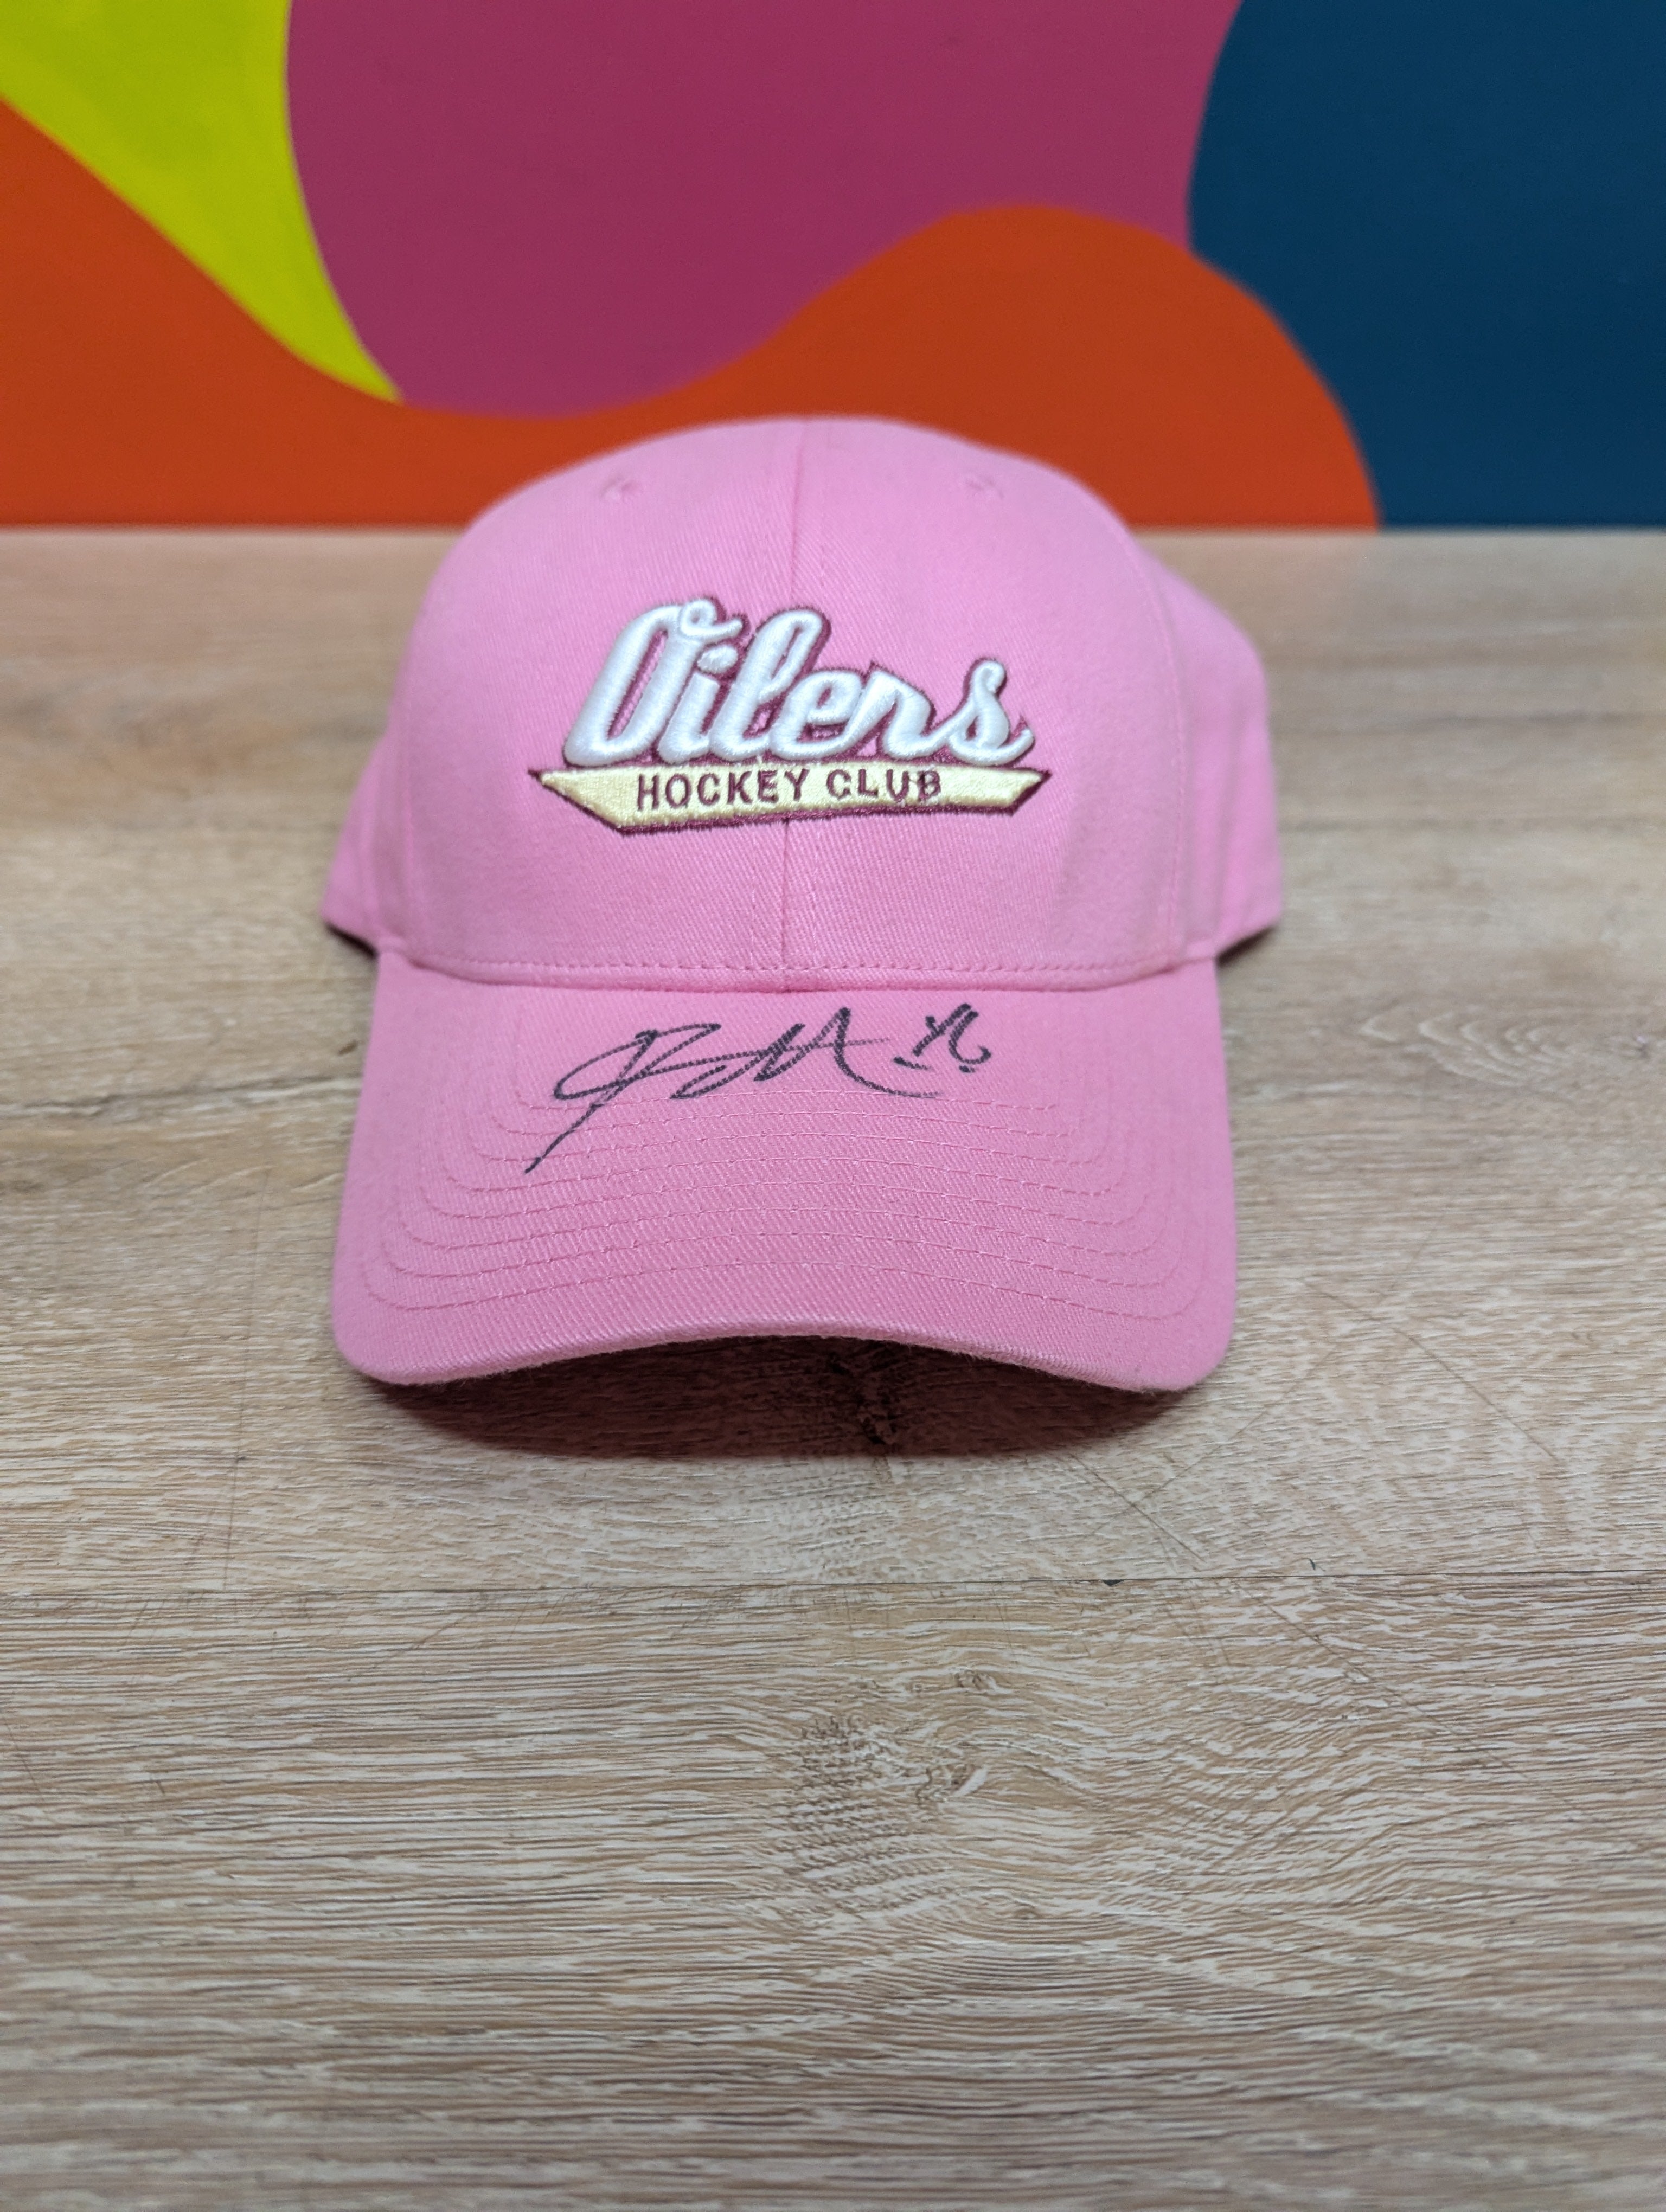 Oilers Hockey Club Hat Signed by Zack Stortini